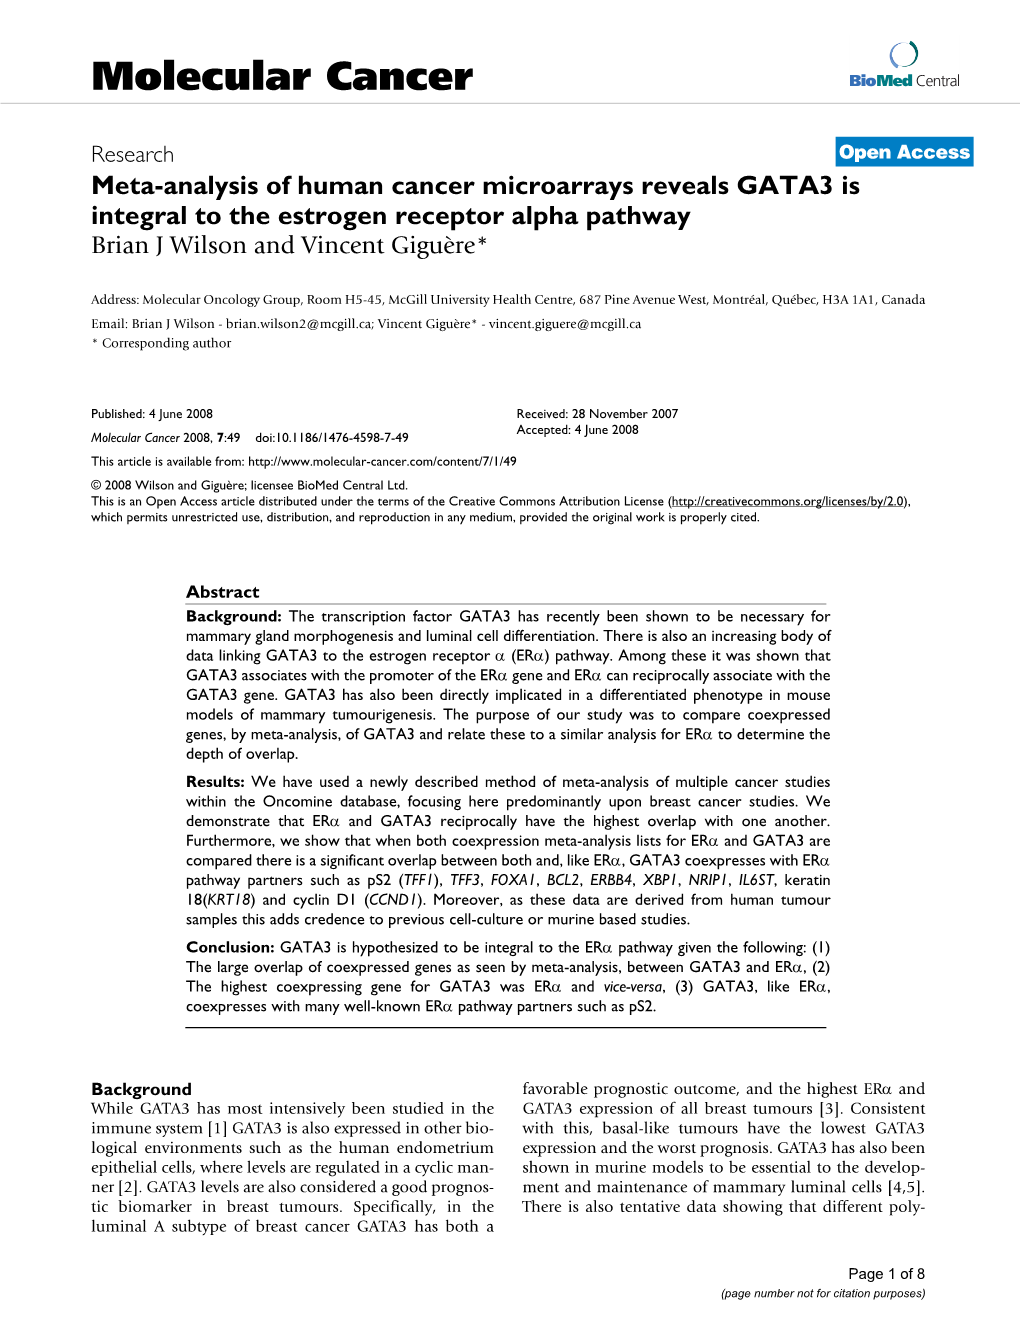 Meta-Analysis of Human Cancer Microarrays Reveals GATA3 Is Integral to the Estrogen Receptor Alpha Pathway Brian J Wilson and Vincent Giguère*